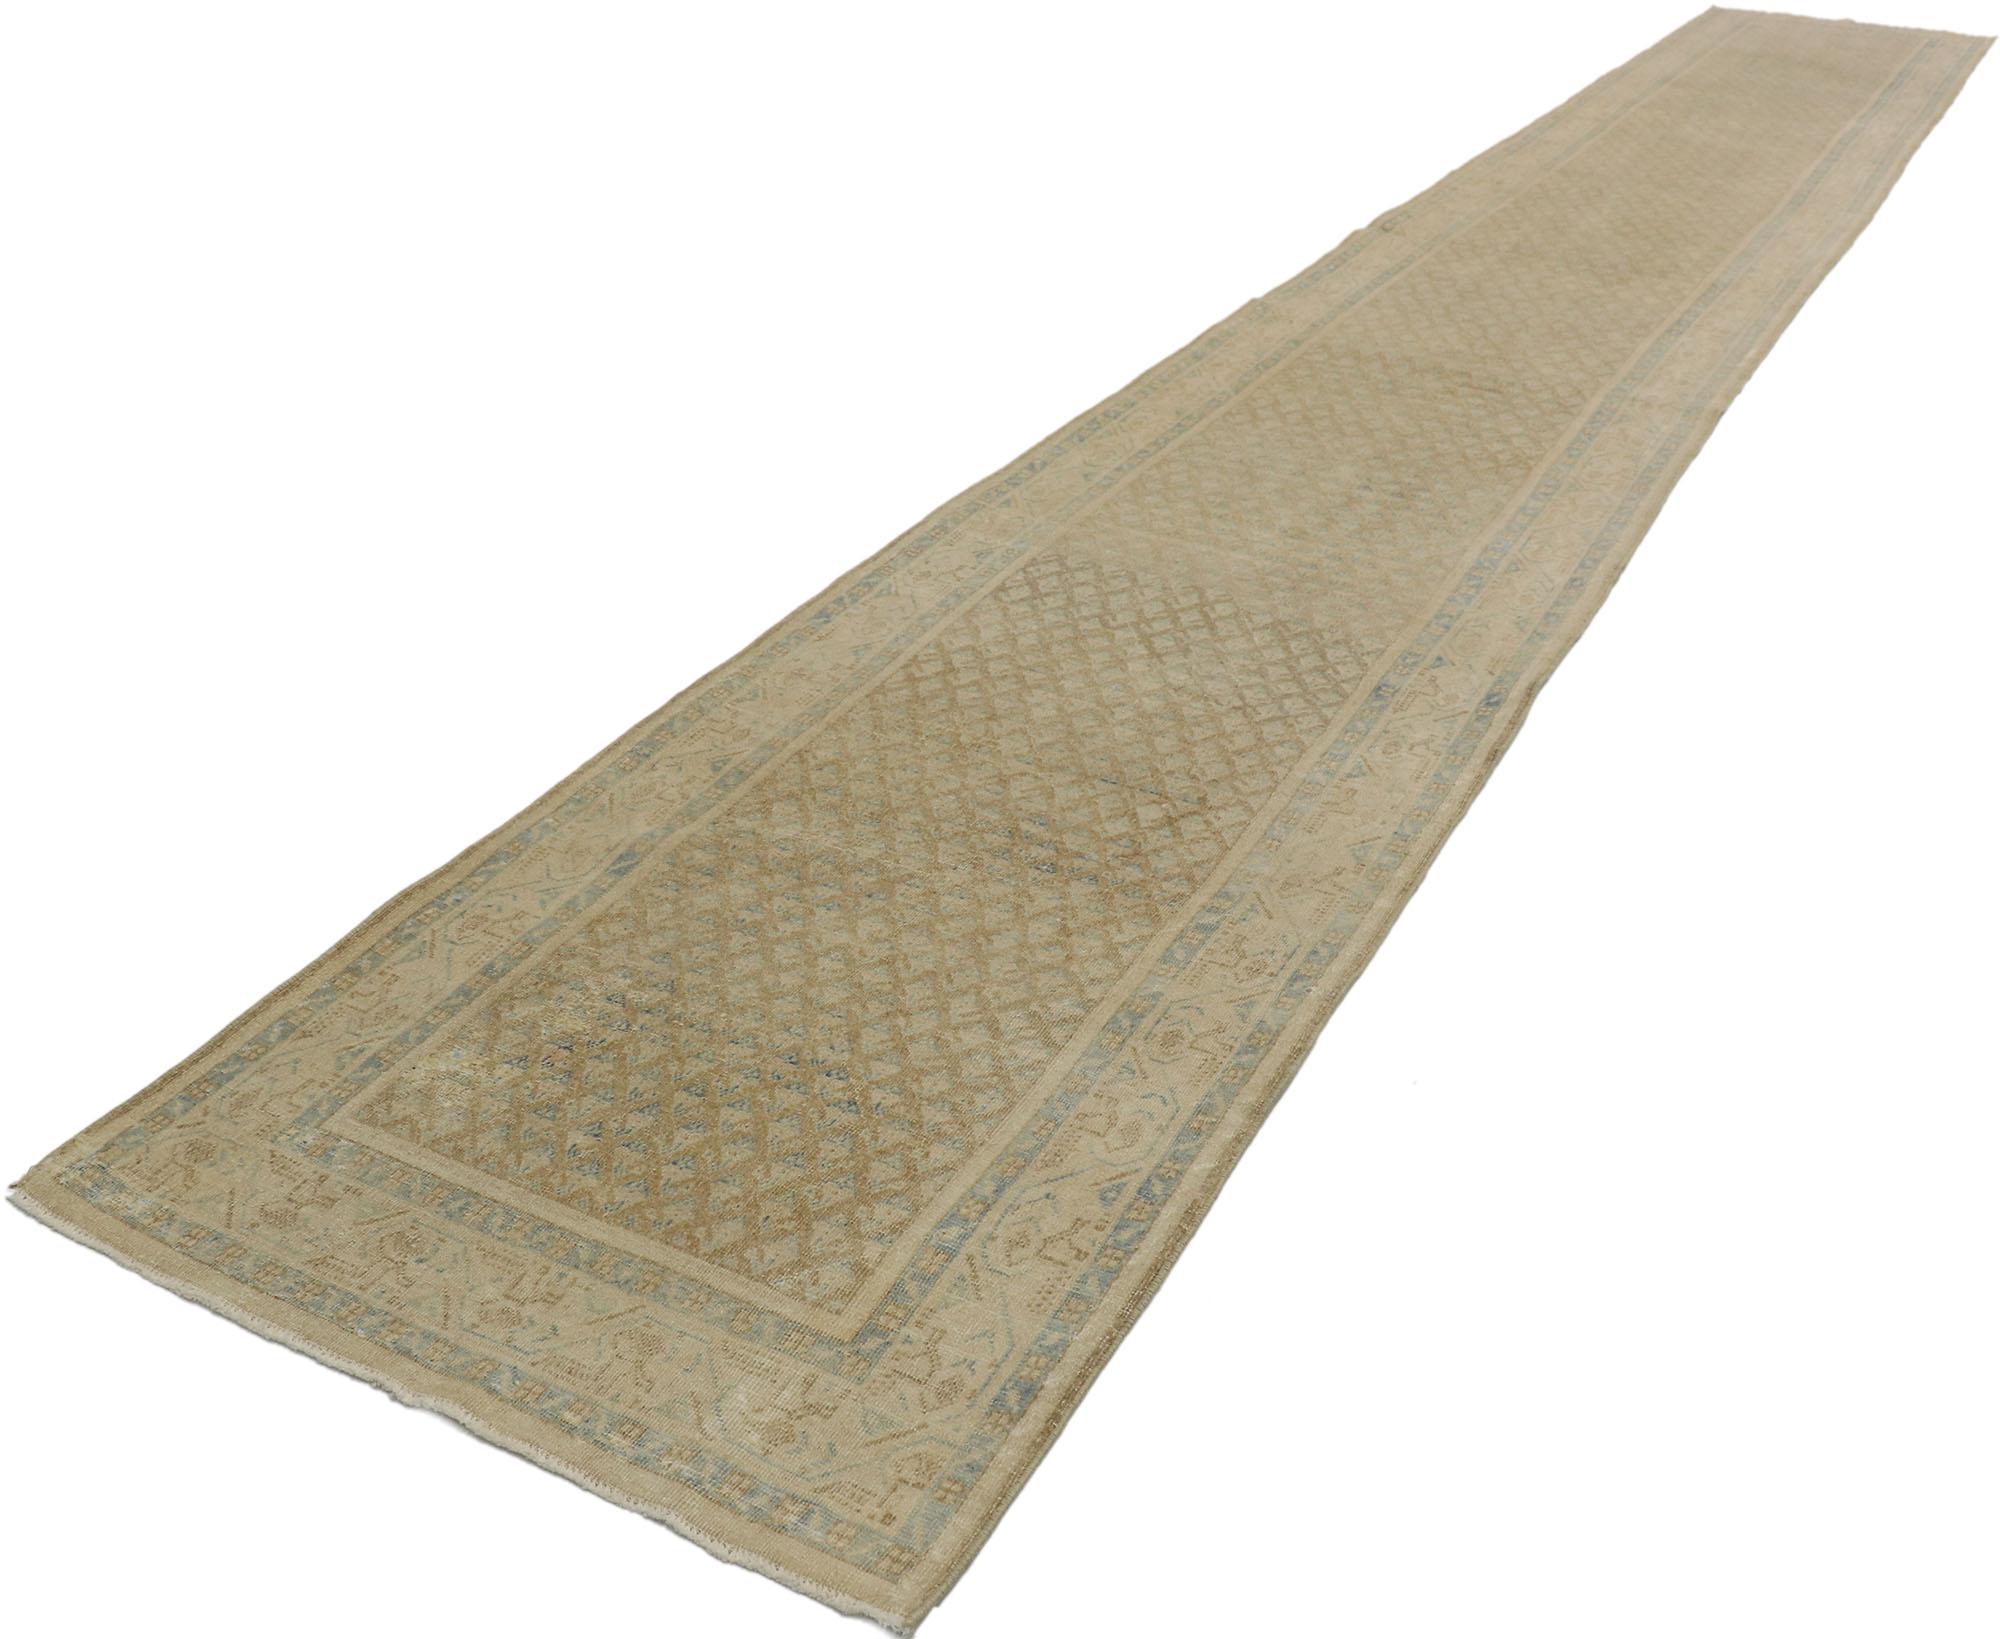 53234, distressed antique Persian Saraband Runner with Mir Boteh design. Simplicity and effortless beauty meet soft, bespoke vibes with a modern Shaker style in this hand knotted wool distressed antique Persian Saraband carpet runner. The tan